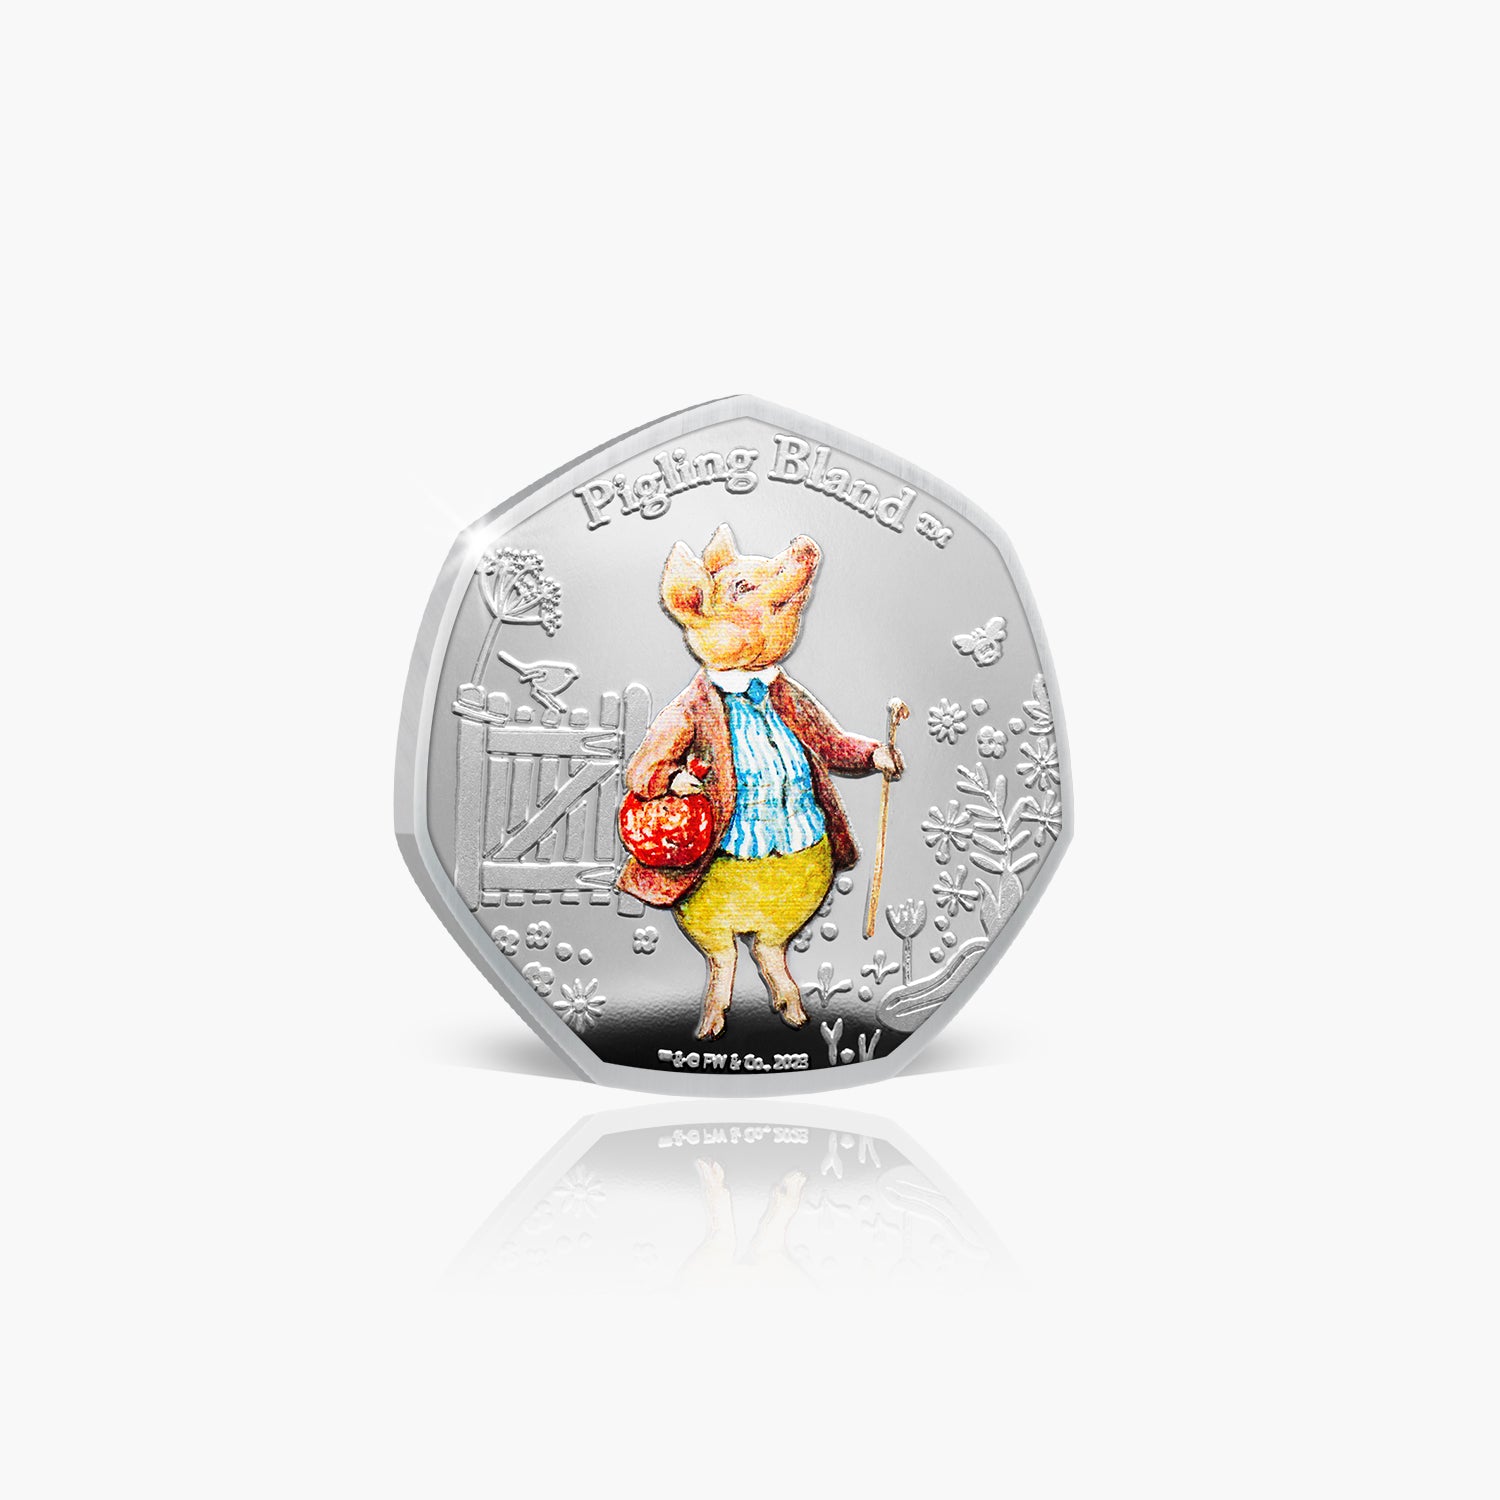 The World of Peter Rabbit 2023 Coin Collection - Pigling Bland Coin